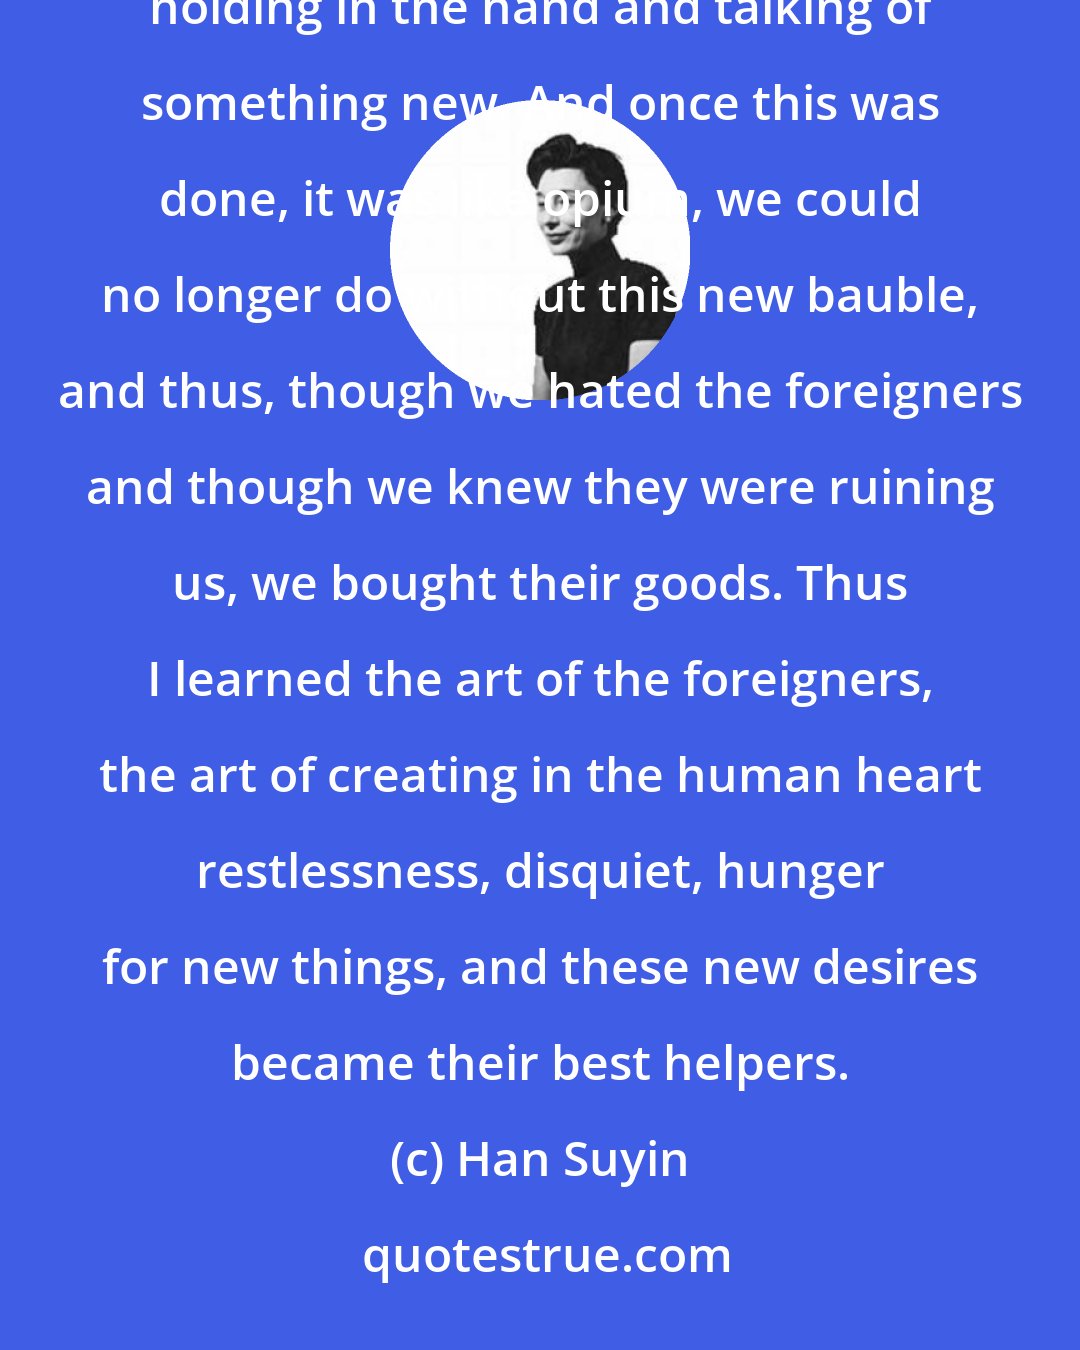 Han Suyin: These ways to make people buy were strange and new to us, and many bought for the sheer pleasure at first of holding in the hand and talking of something new. And once this was done, it was like opium, we could no longer do without this new bauble, and thus, though we hated the foreigners and though we knew they were ruining us, we bought their goods. Thus I learned the art of the foreigners, the art of creating in the human heart restlessness, disquiet, hunger for new things, and these new desires became their best helpers.